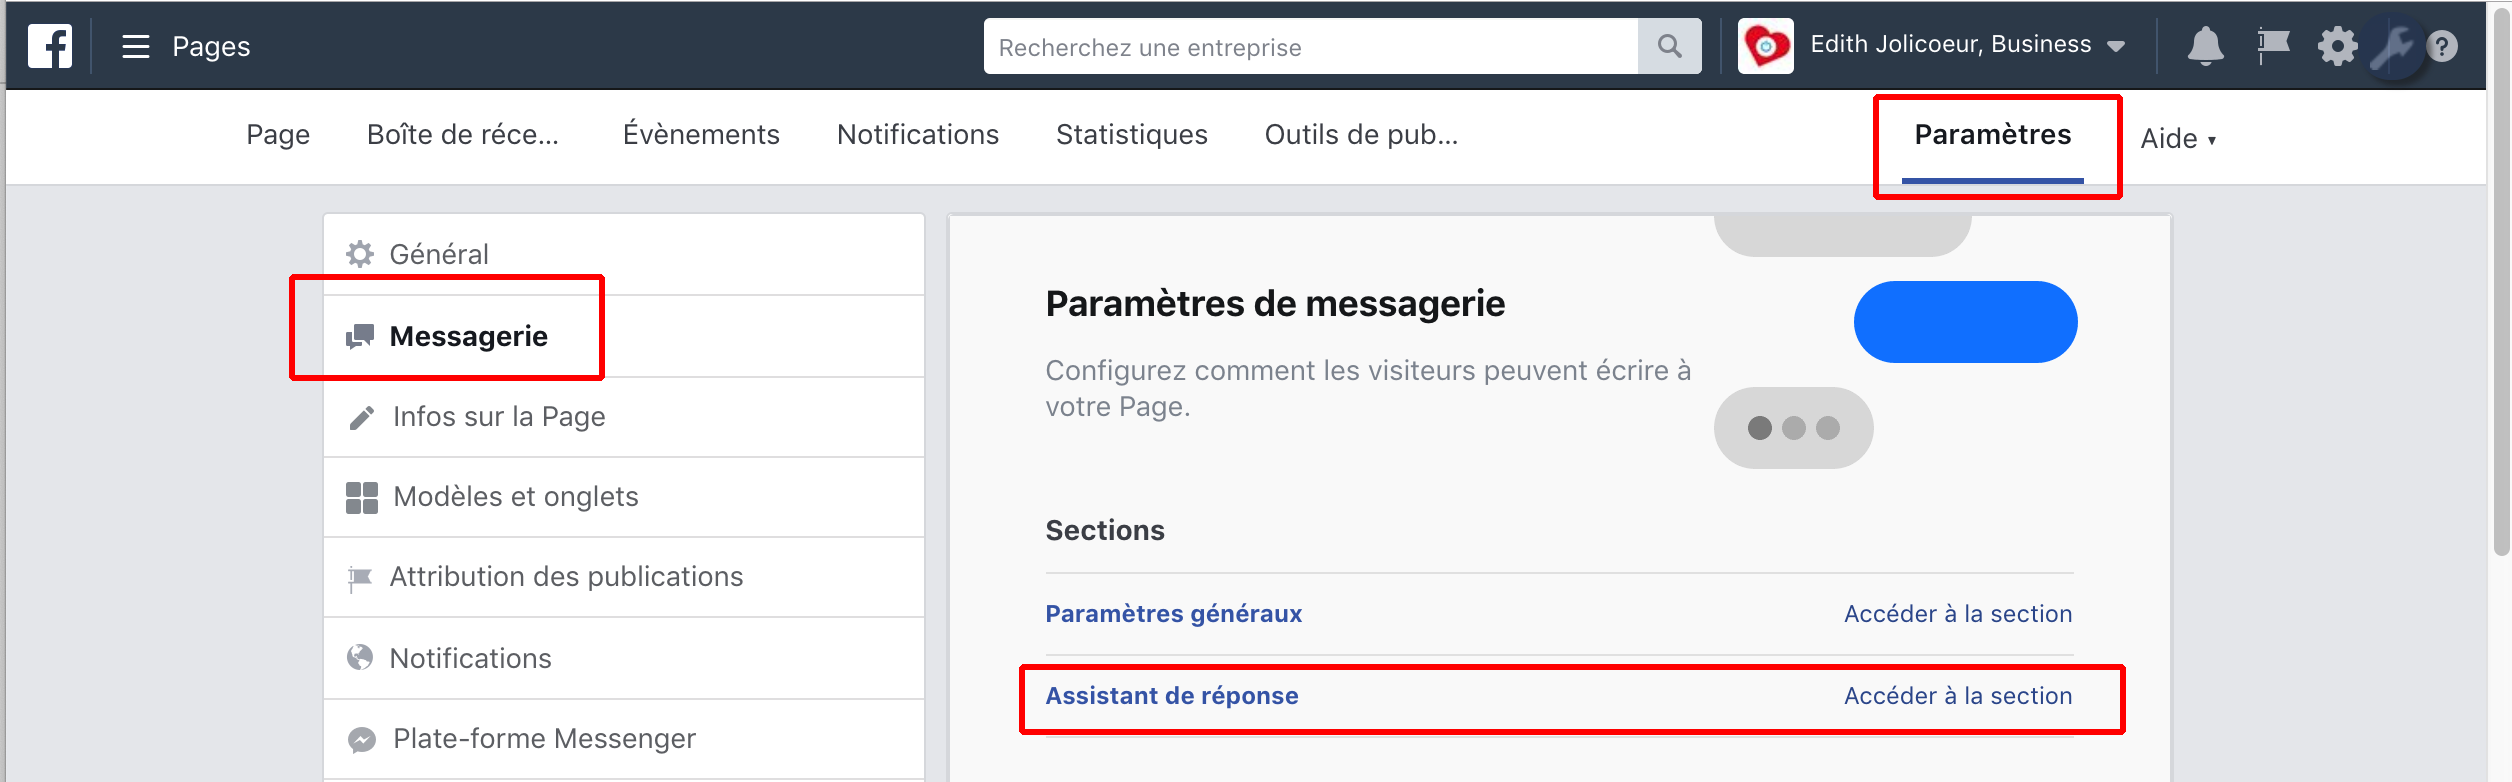 Capture message Page Facebook absence